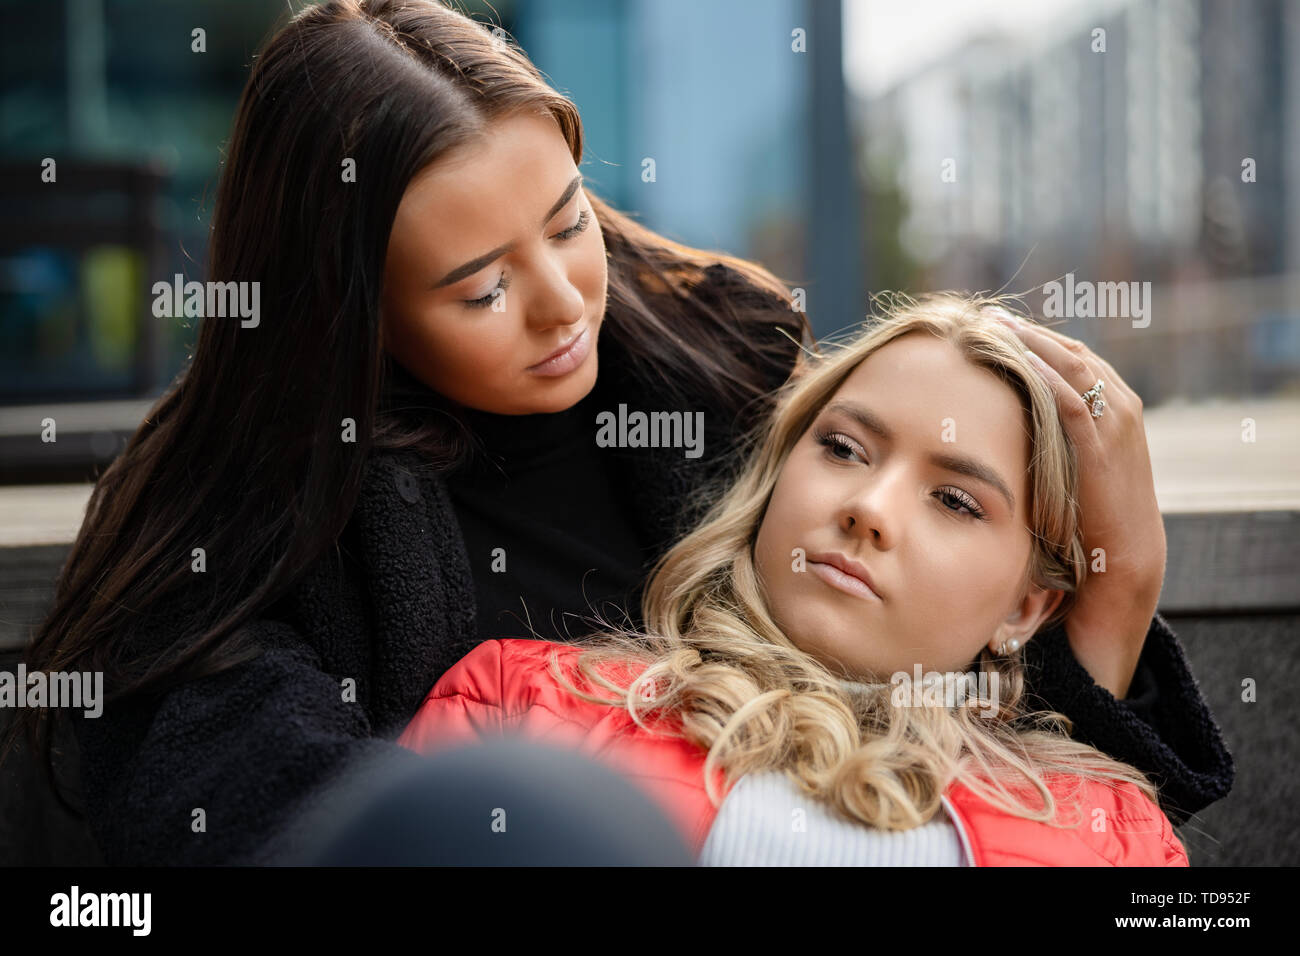 Young Woman Consoling Sad Friend In City Stock Photo